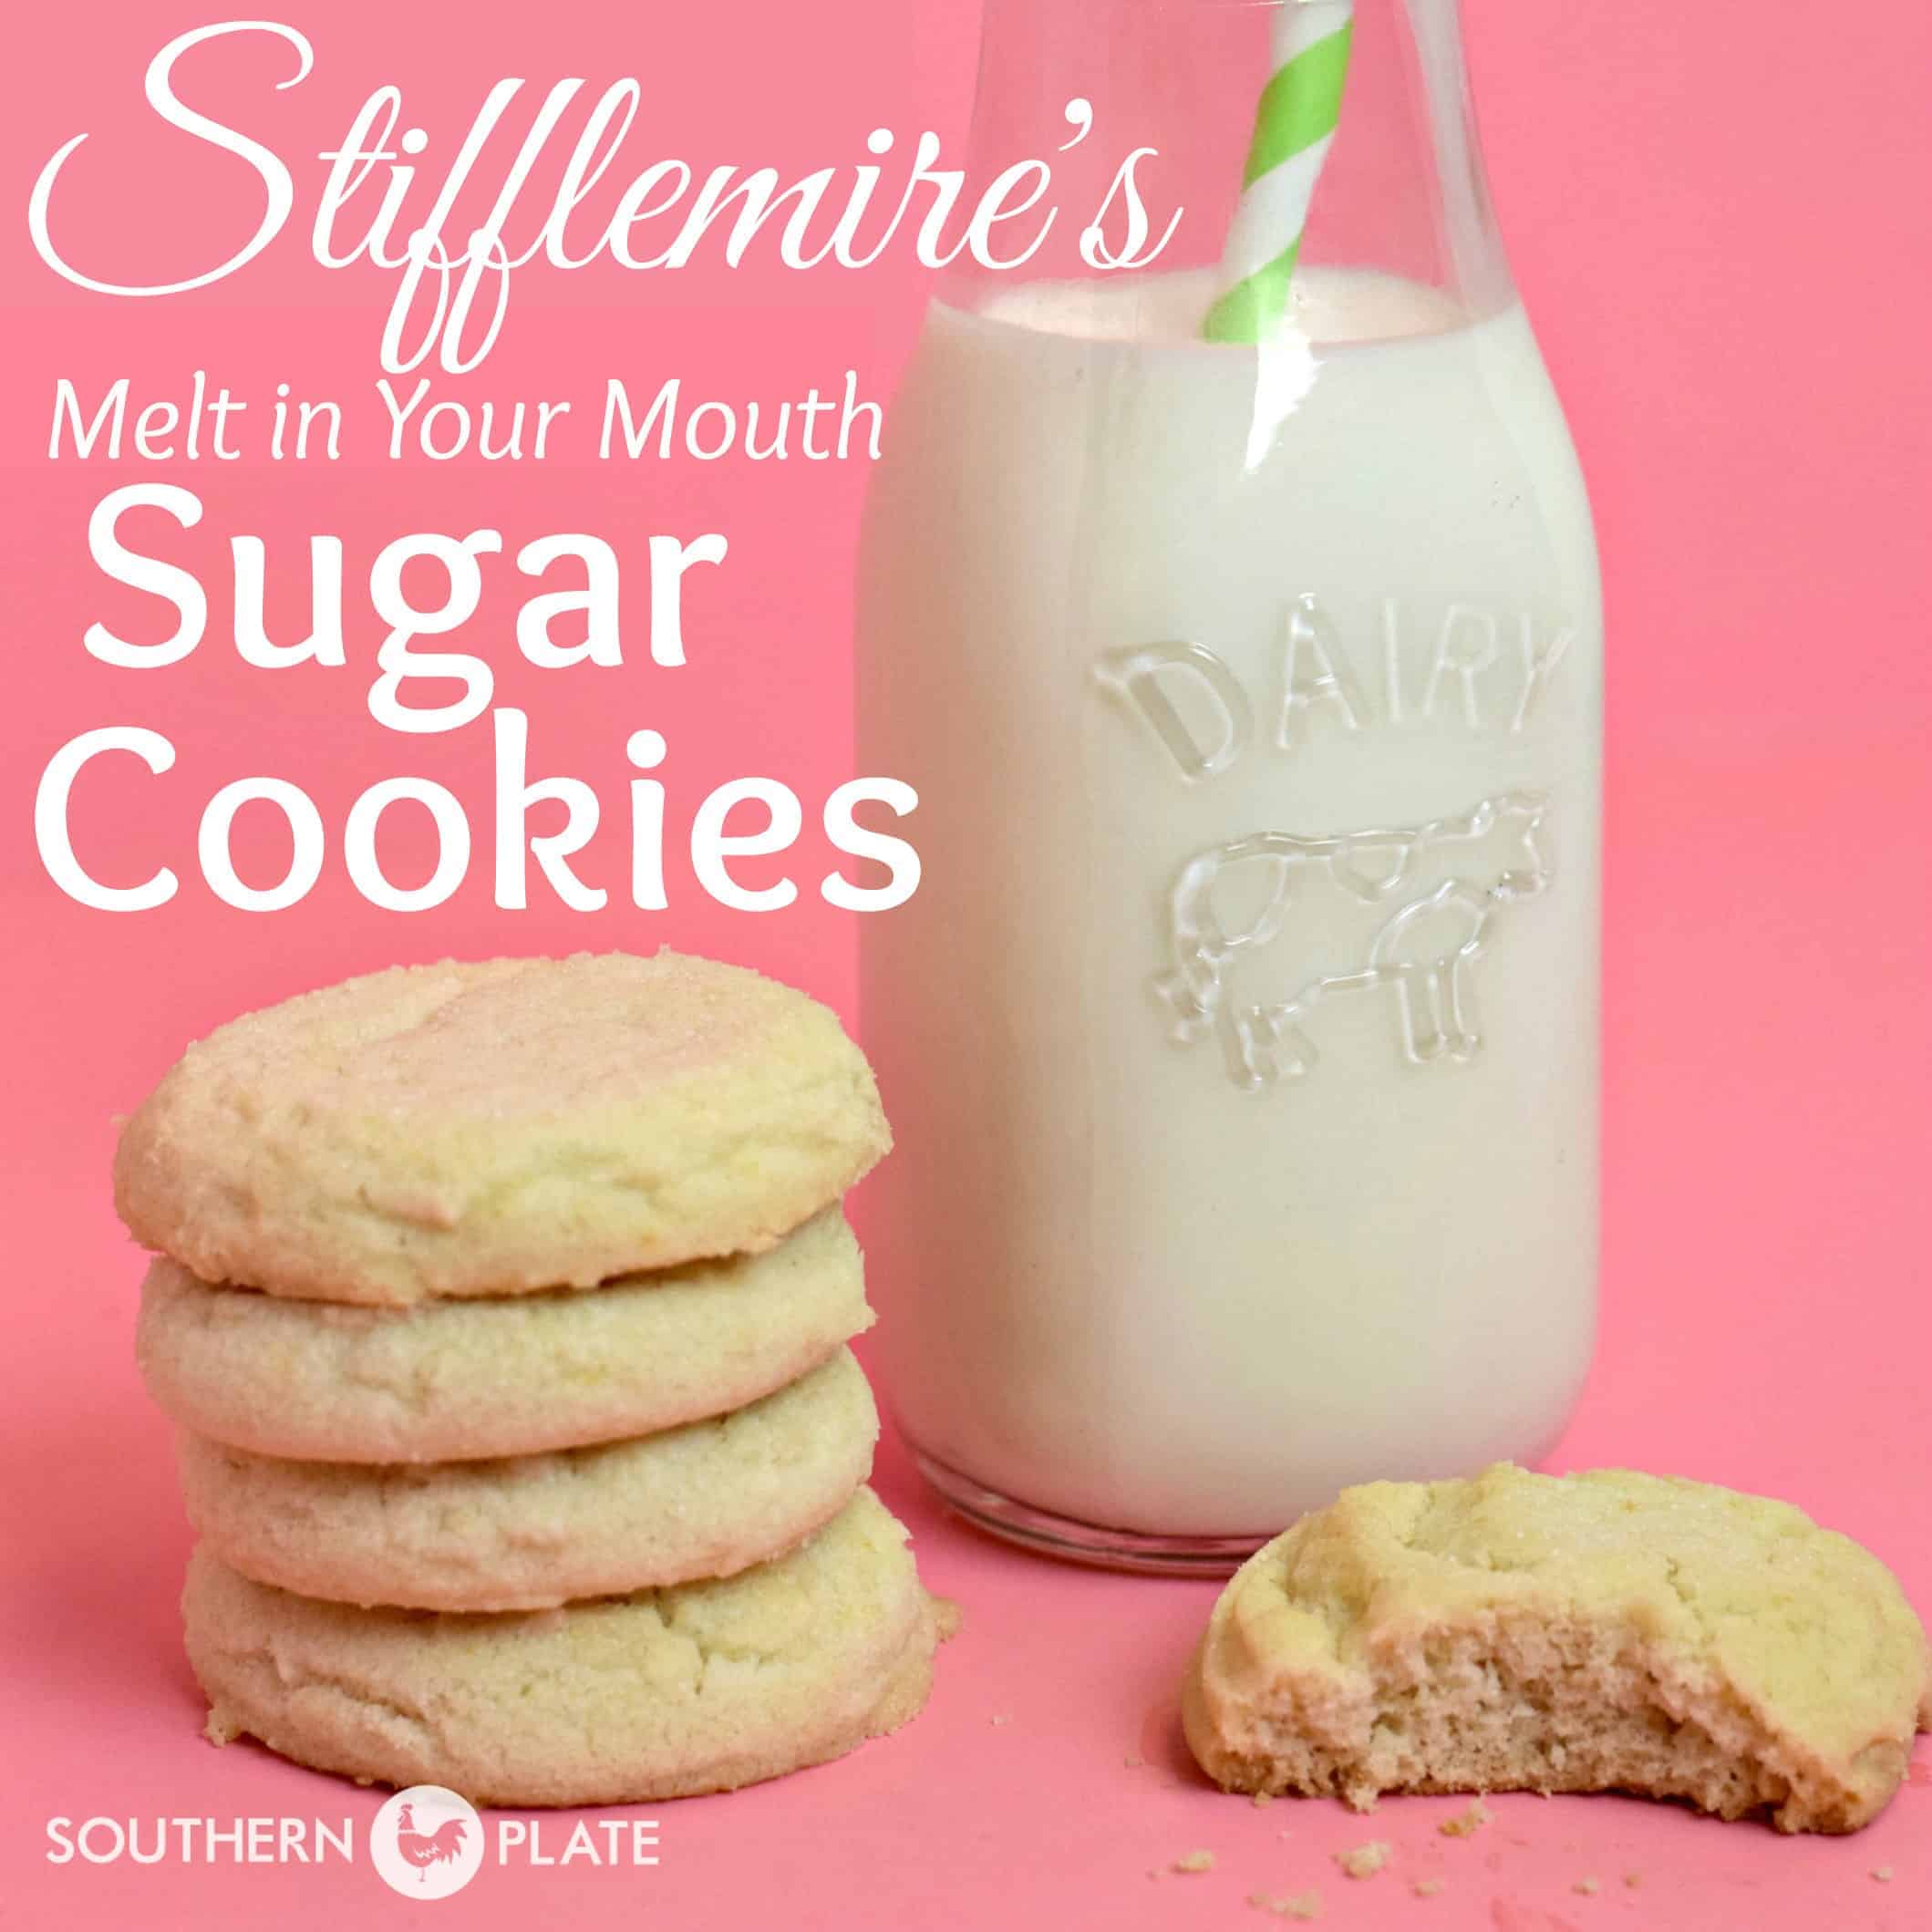 Stifflemire’s Melt In Your Mouth Sugar Cookies